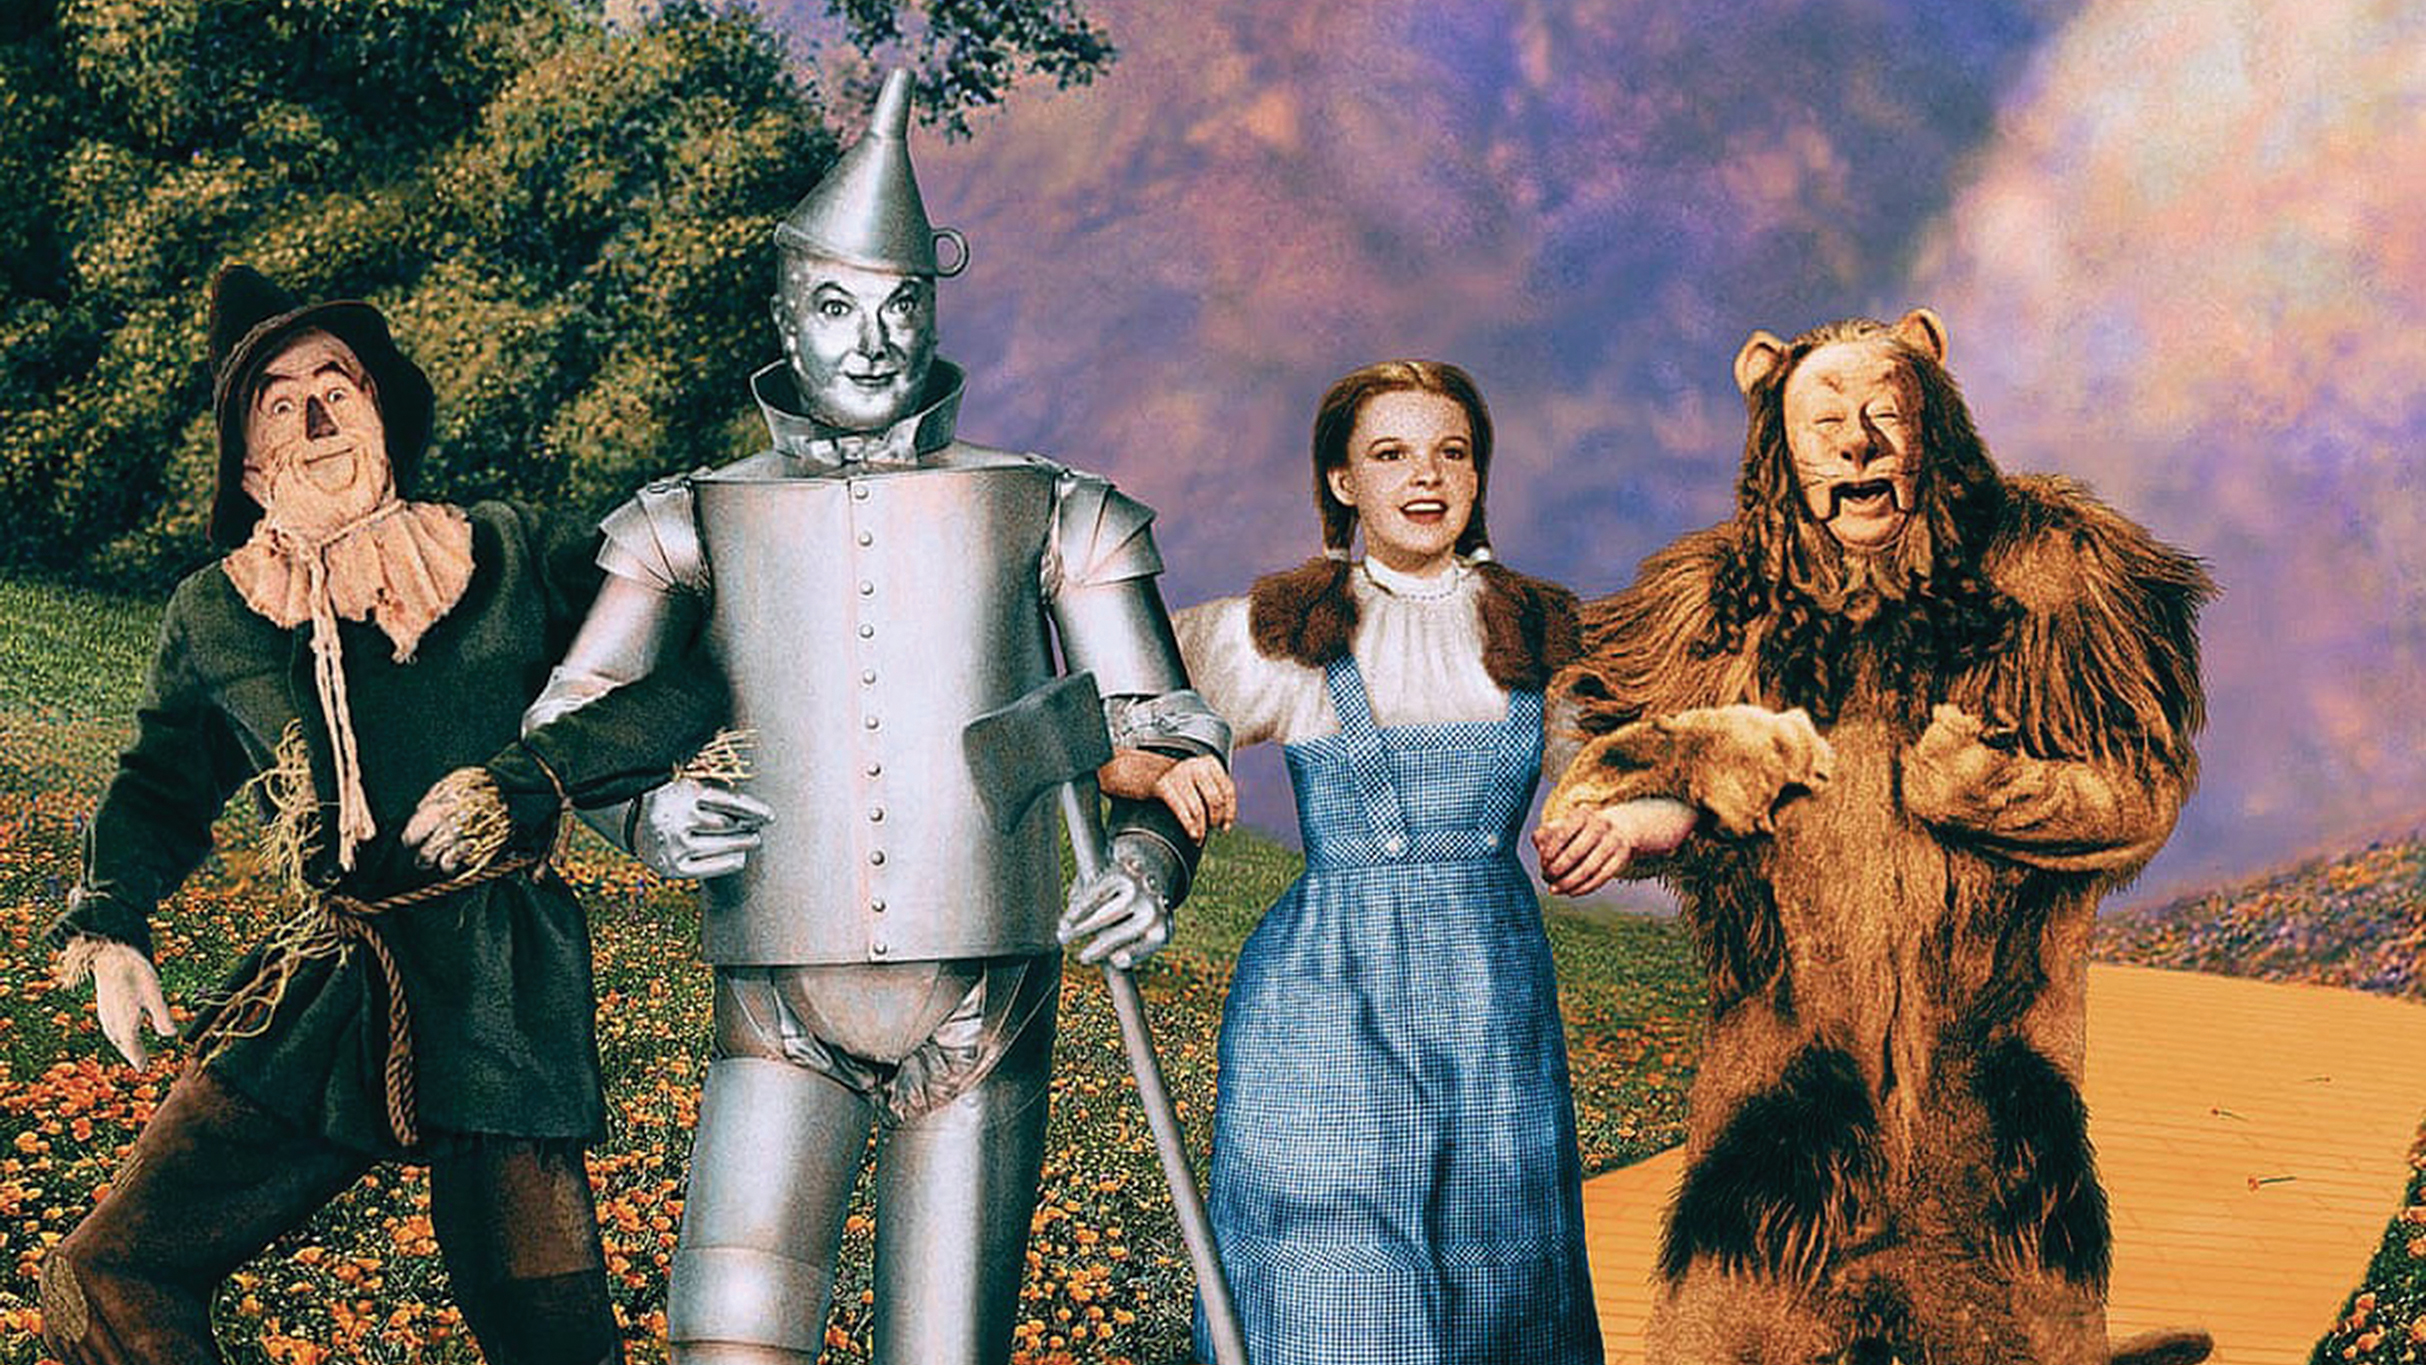 RPO Presents The Wizard of Oz